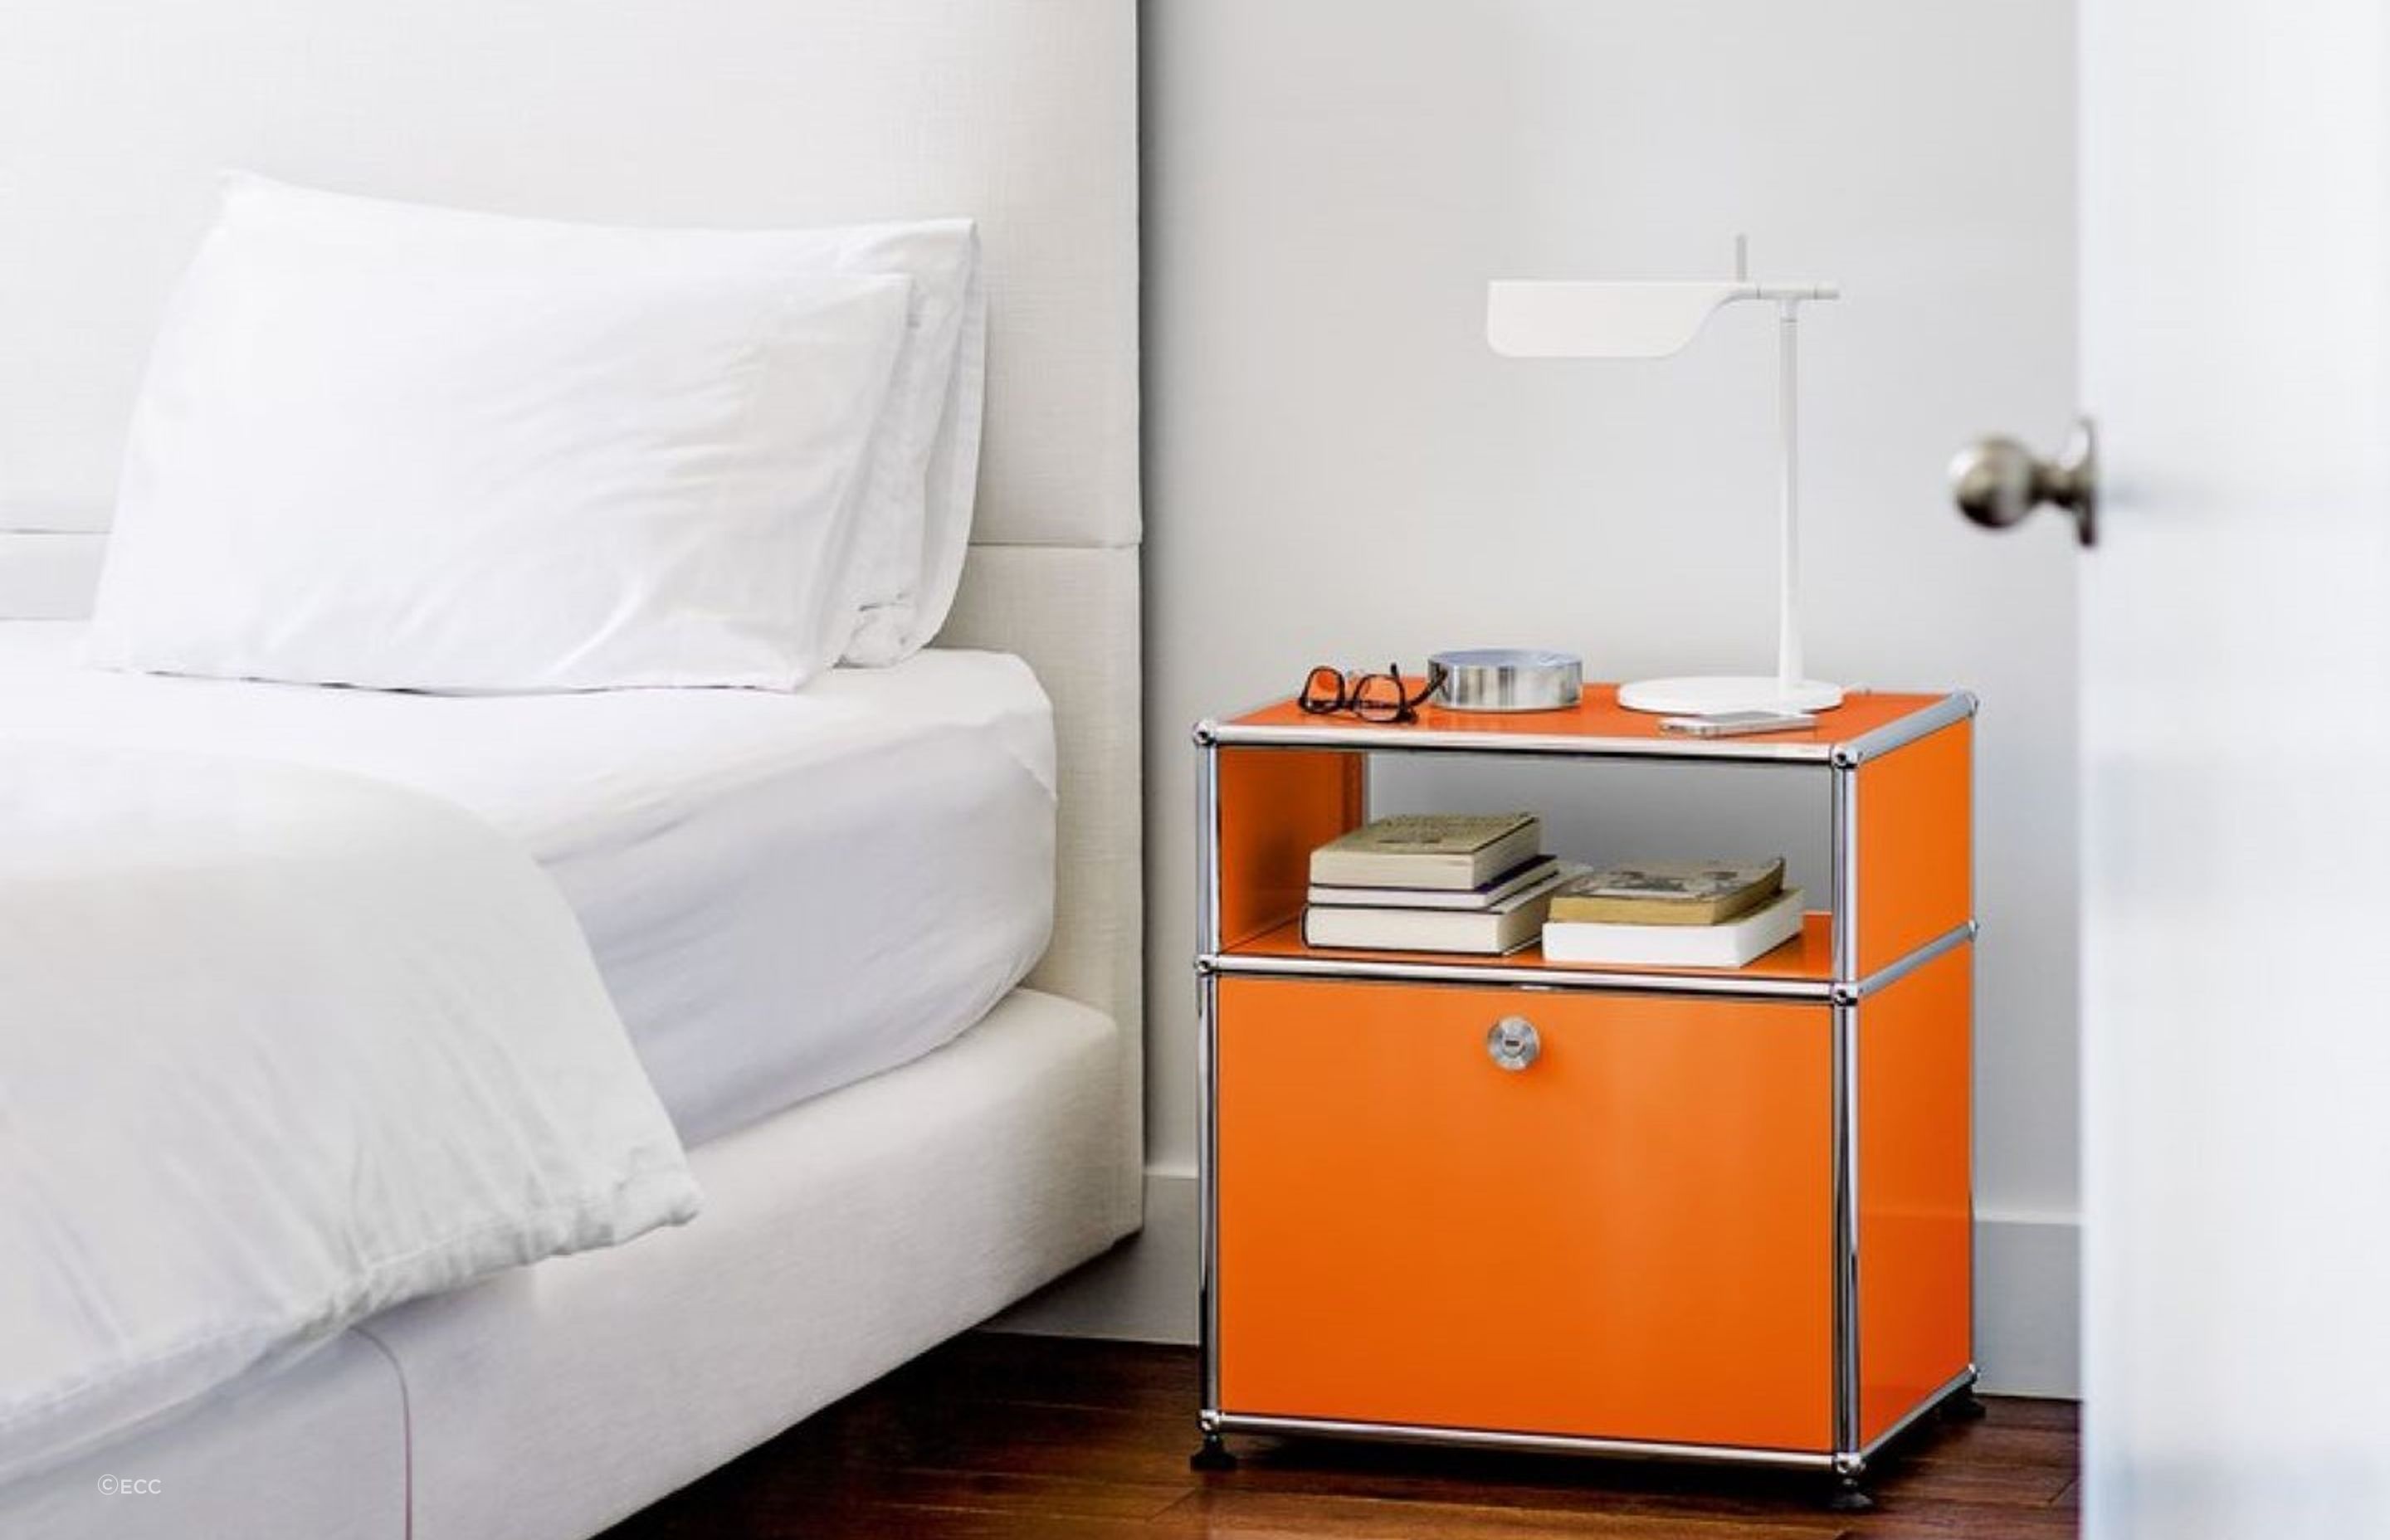 The USM Haller Bedside Table is available in 14 different colours and can really pack a bit of pop into a space when used well.